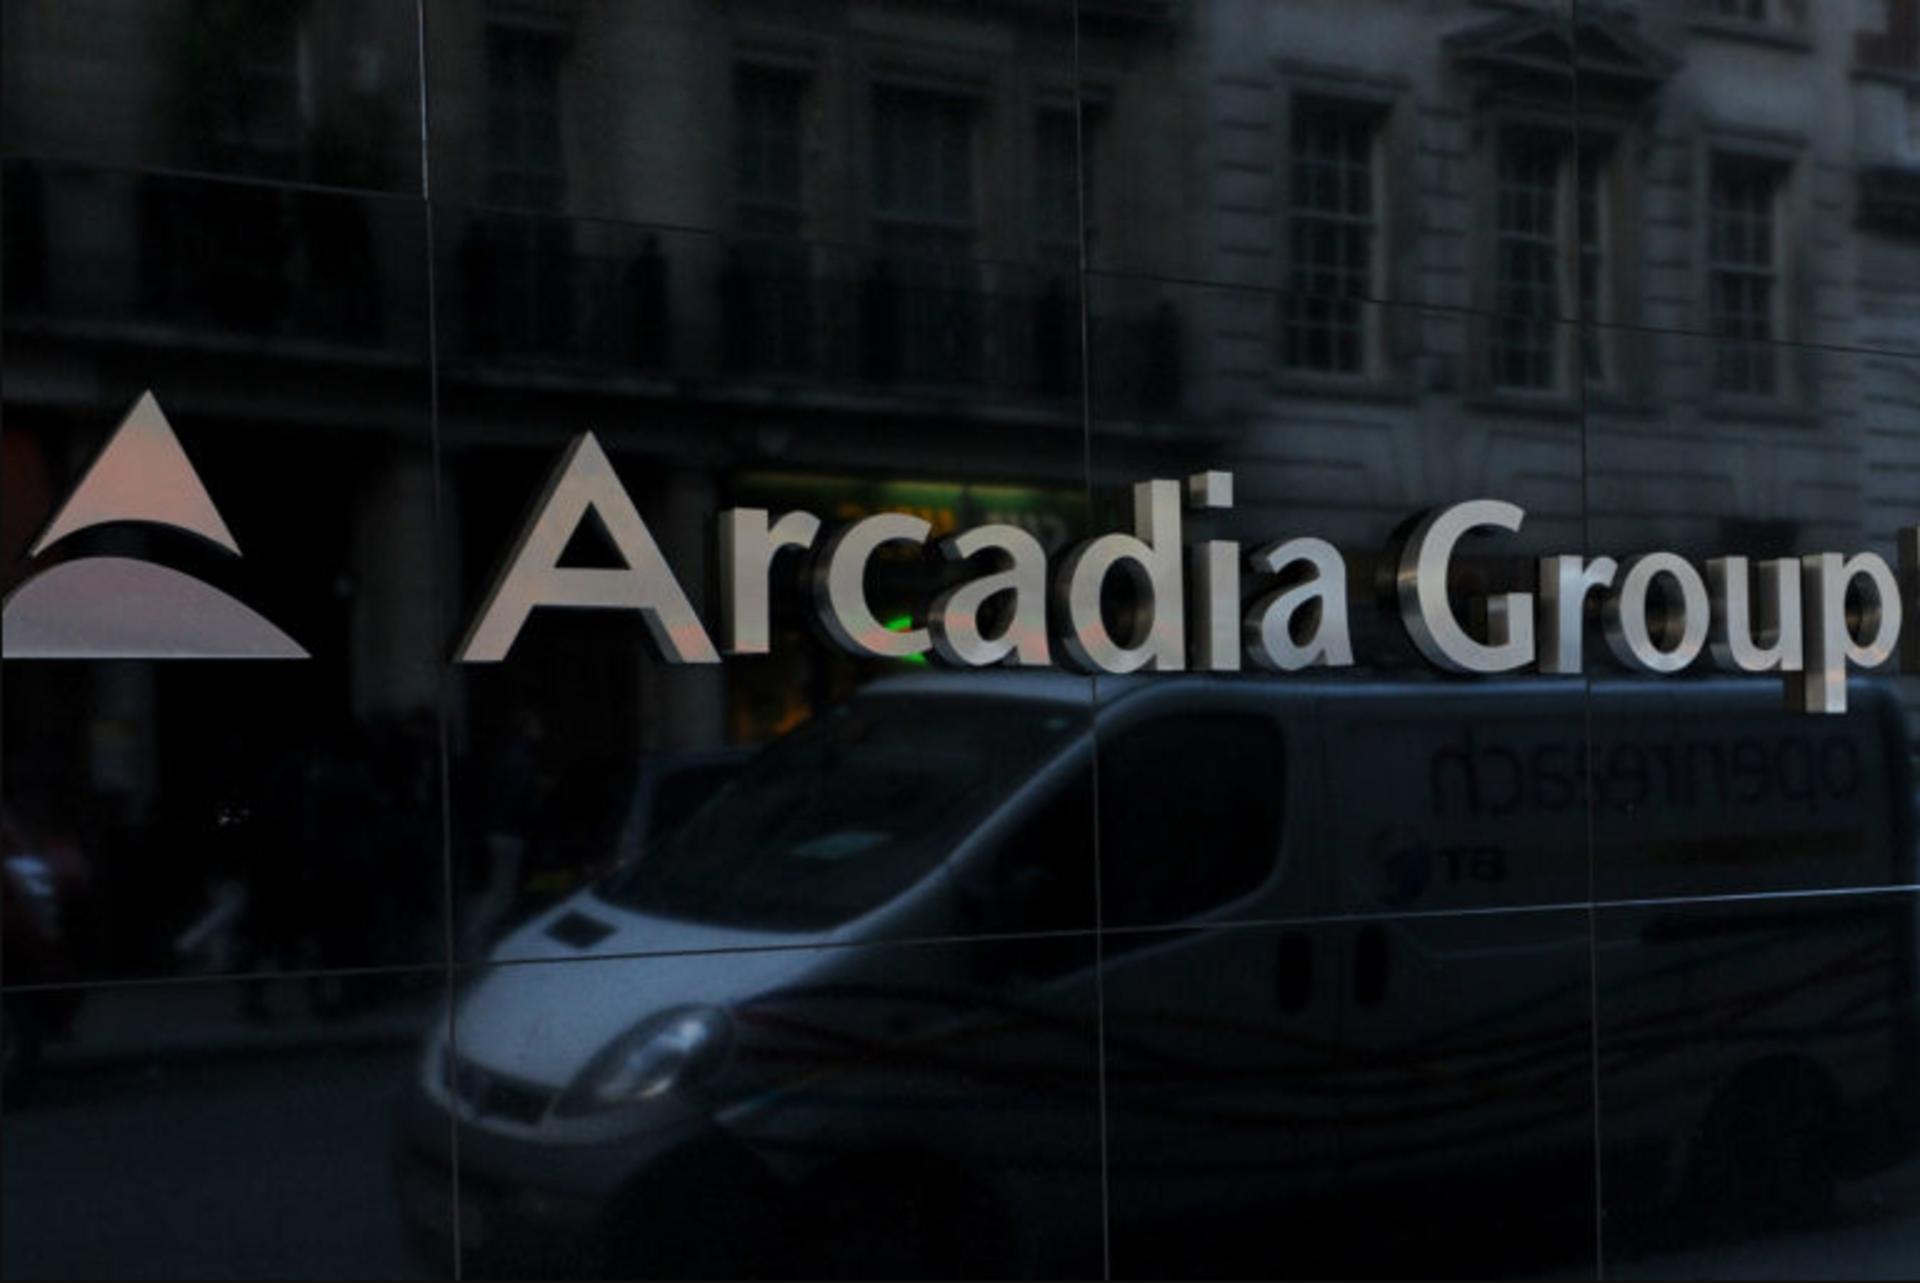 Arcadia Group head office assets put up for auction